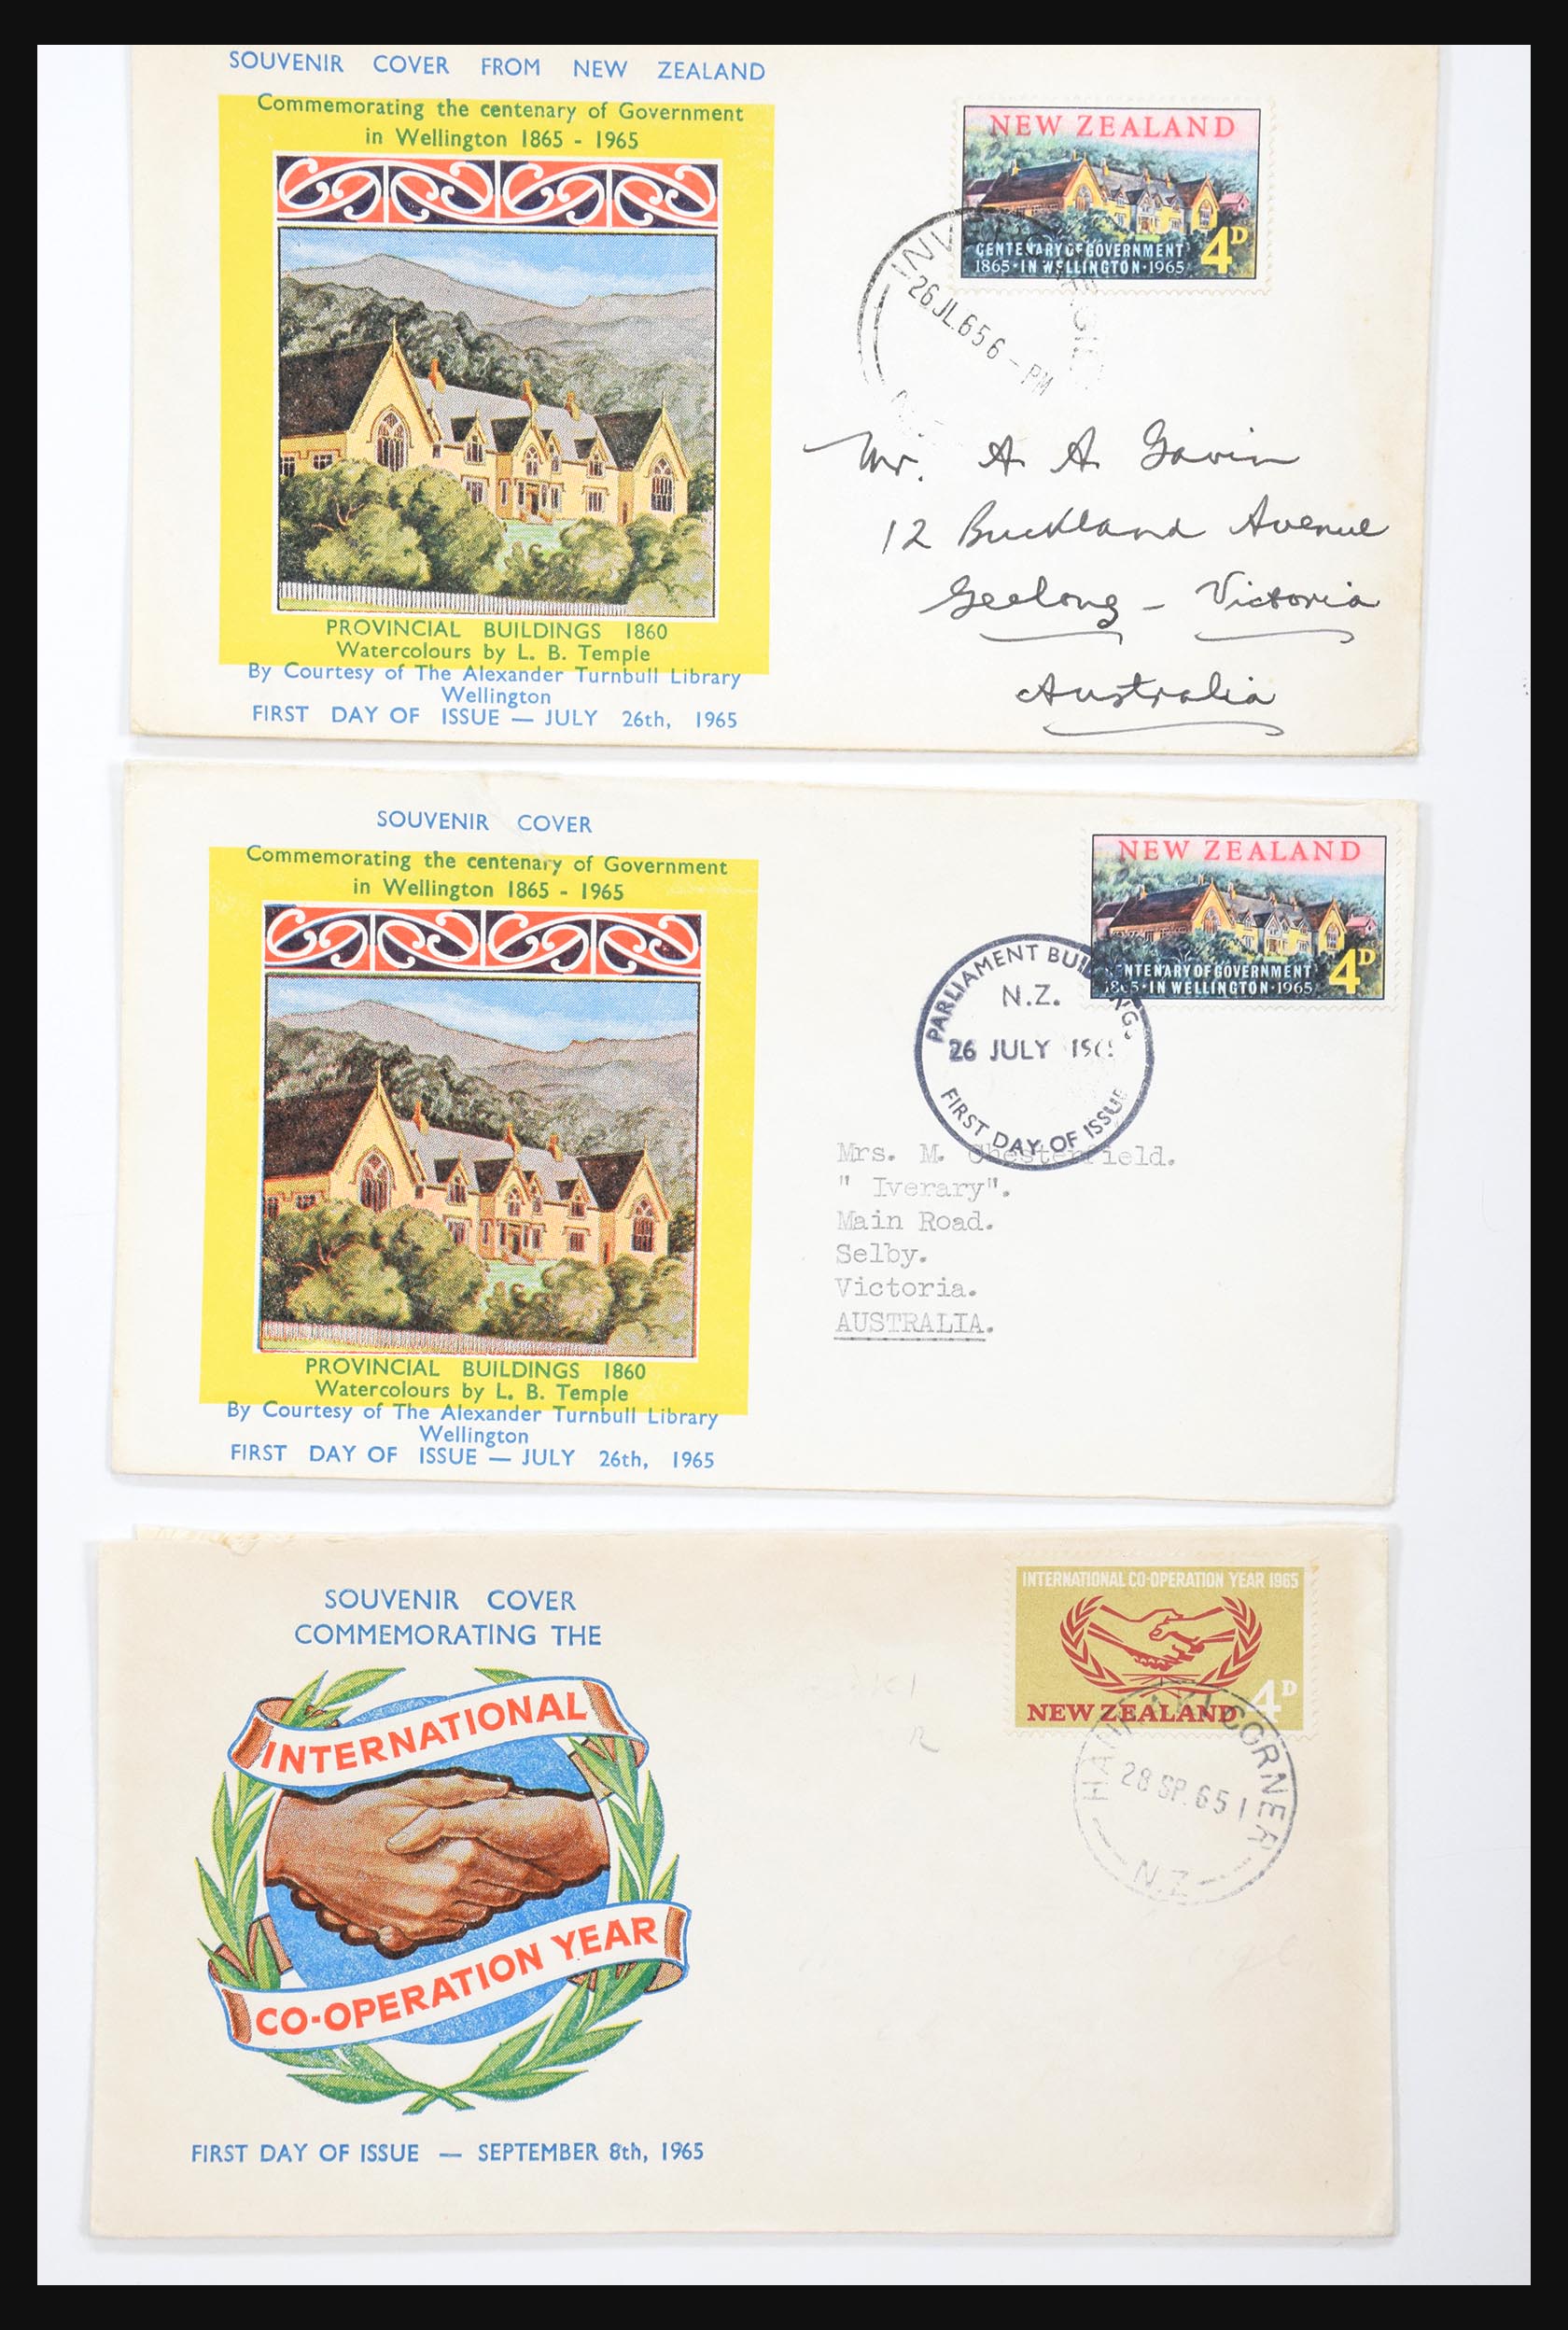 30821 082 - 30821 New Zealand FDC's 1960-1971.